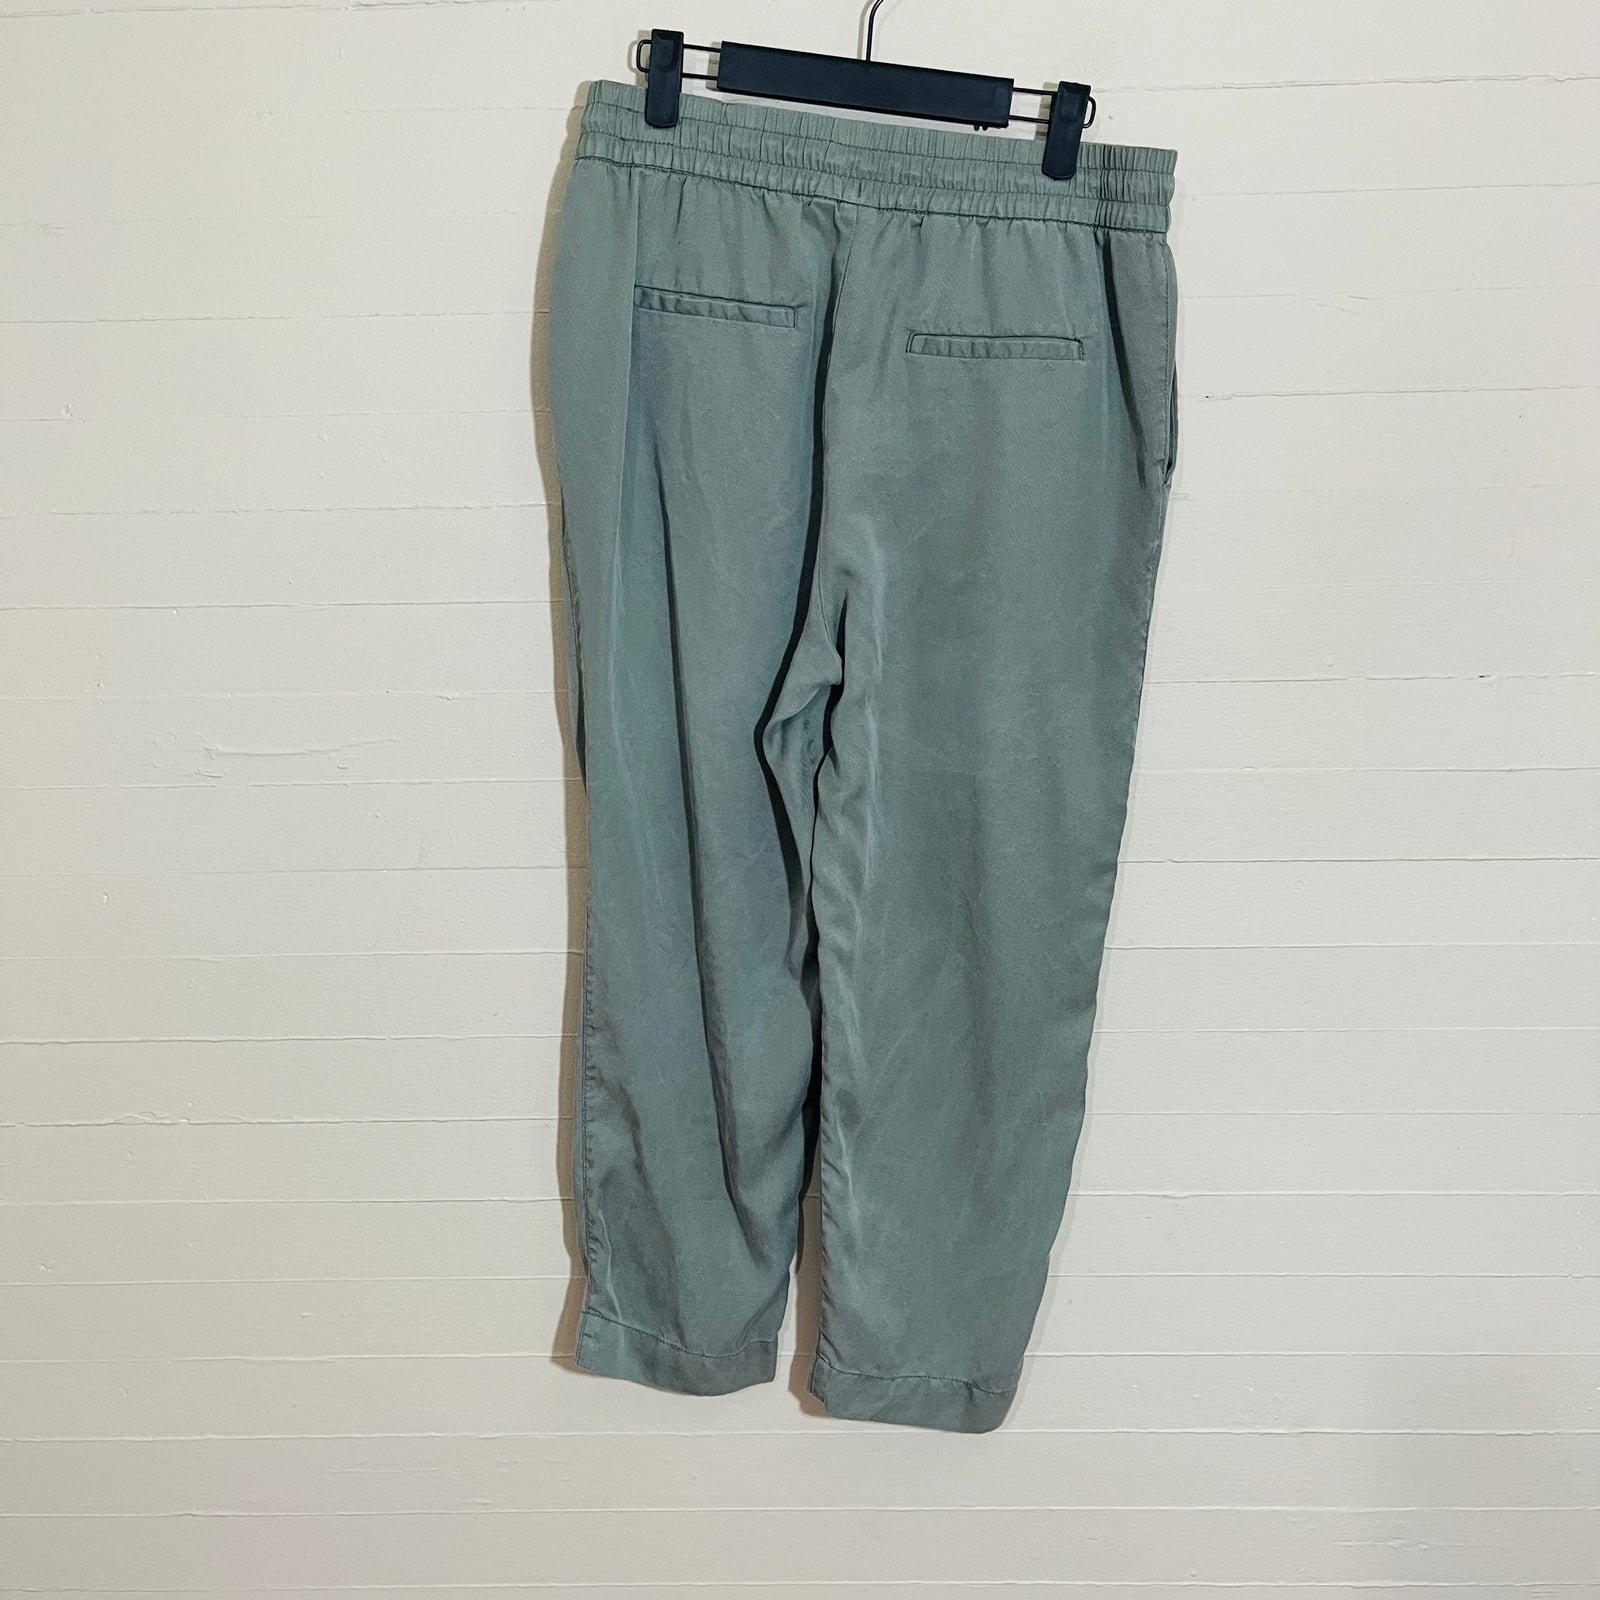 Gorgeous Gap Pin-Tuck Sustainable Tencel Jogger Drawstring Pants SZ 10 Lyocell MS7xK8ral all for you